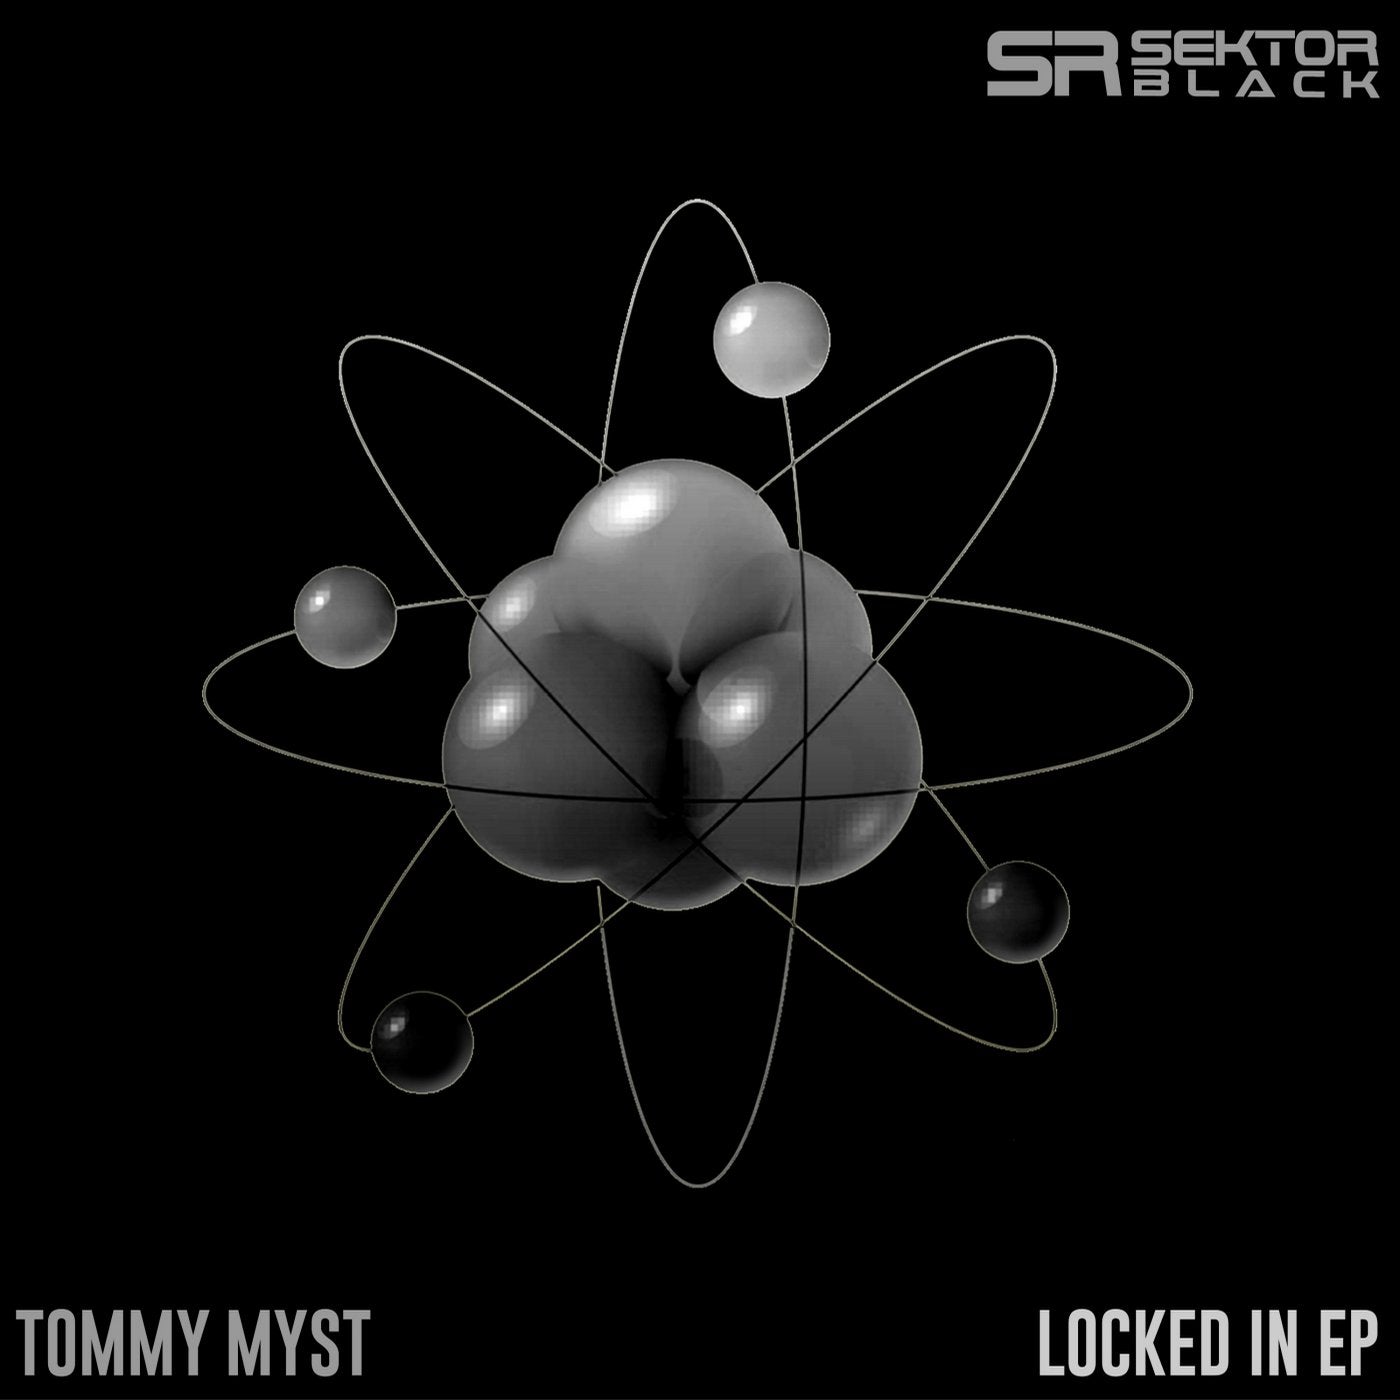 Locked in-EP